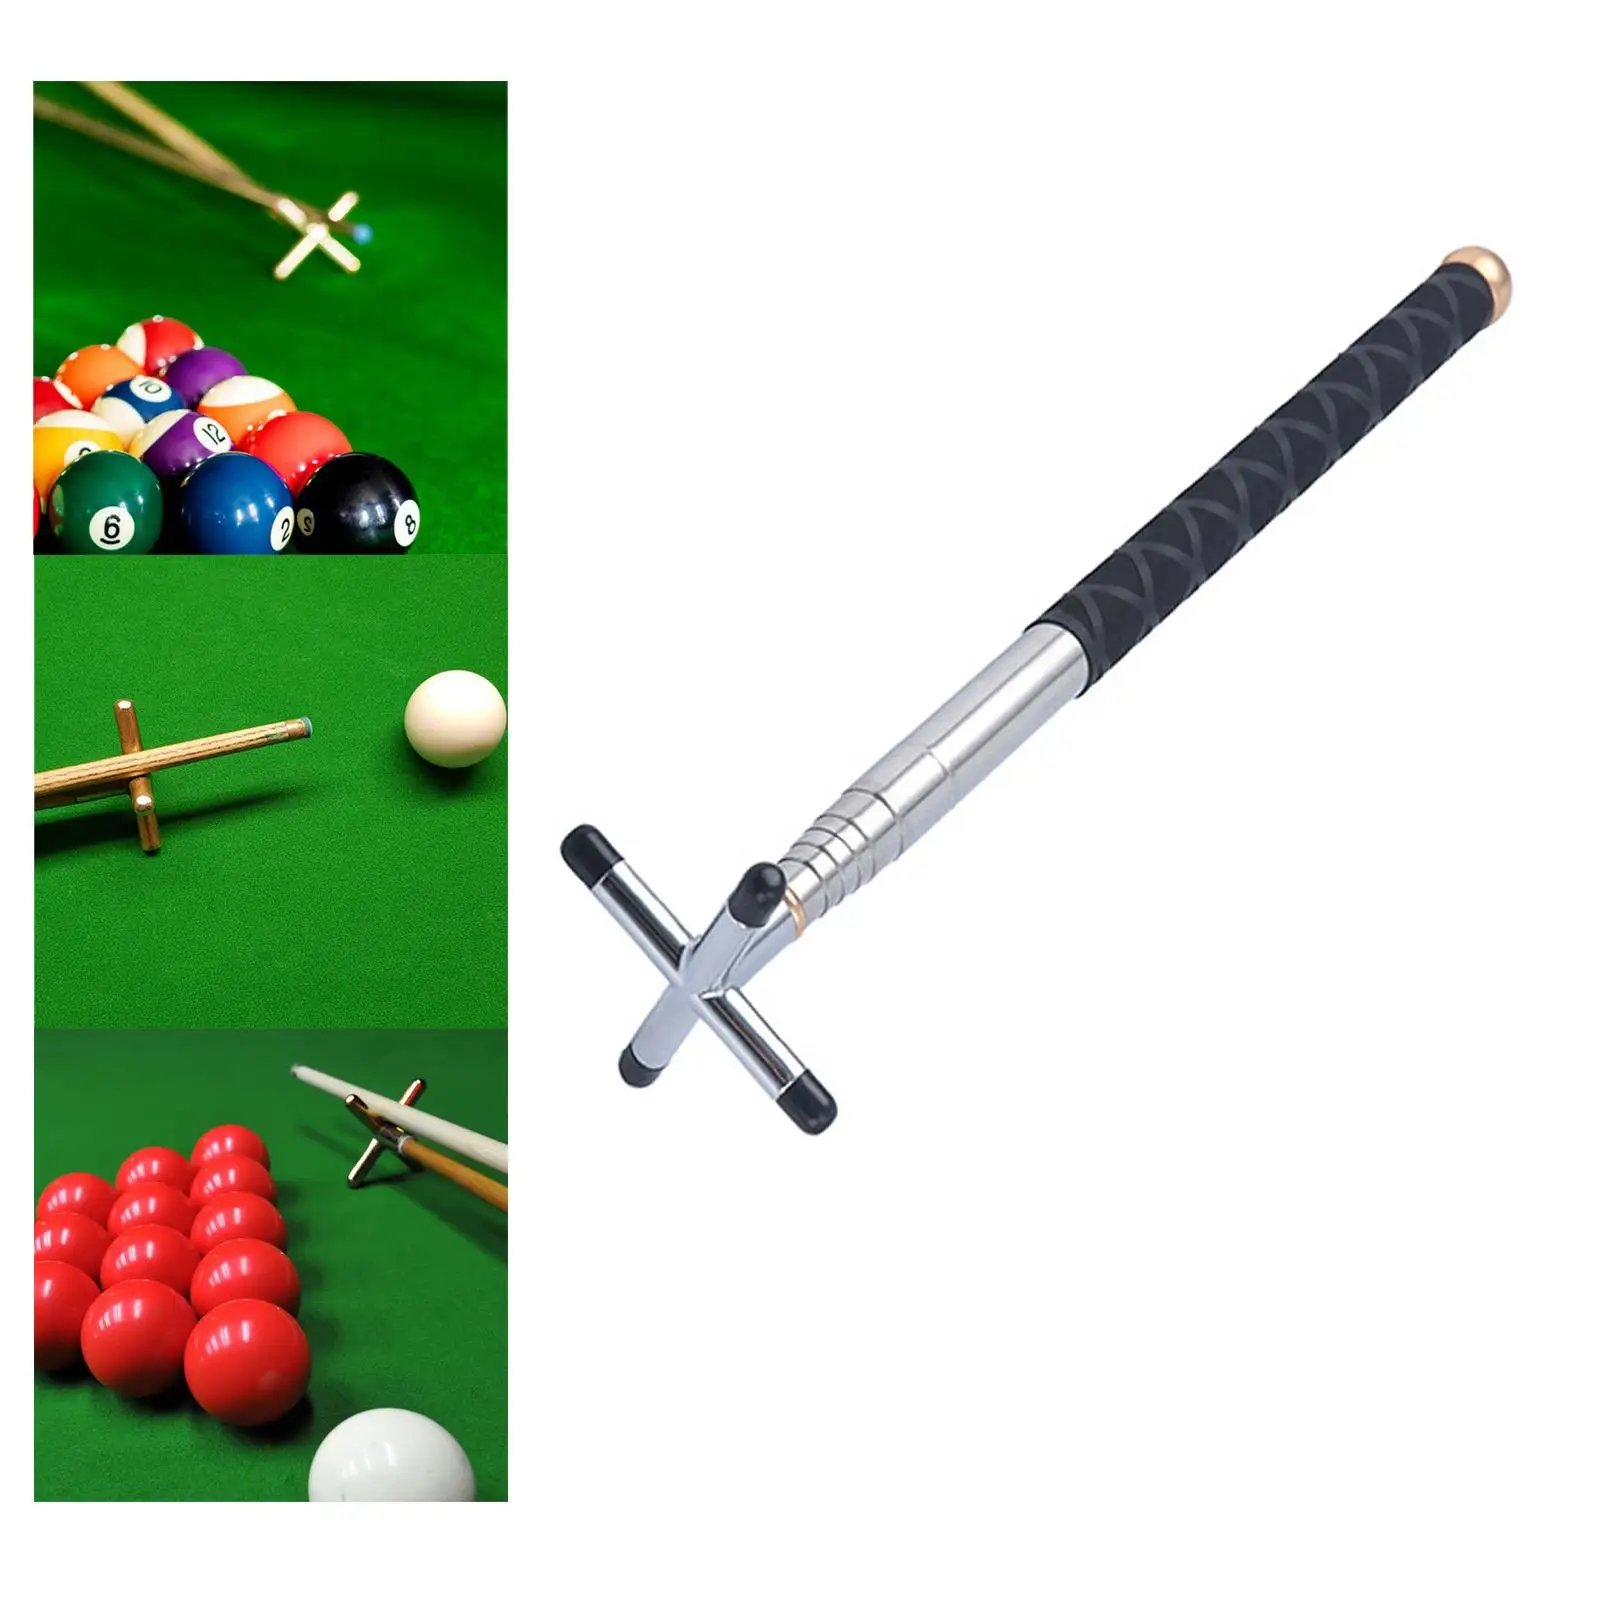 Telescopic Billiards Cue Stick Bridge with Bridge Heads Extender Stainless Steel for Pool Table Snooker Indoor Game Accessories